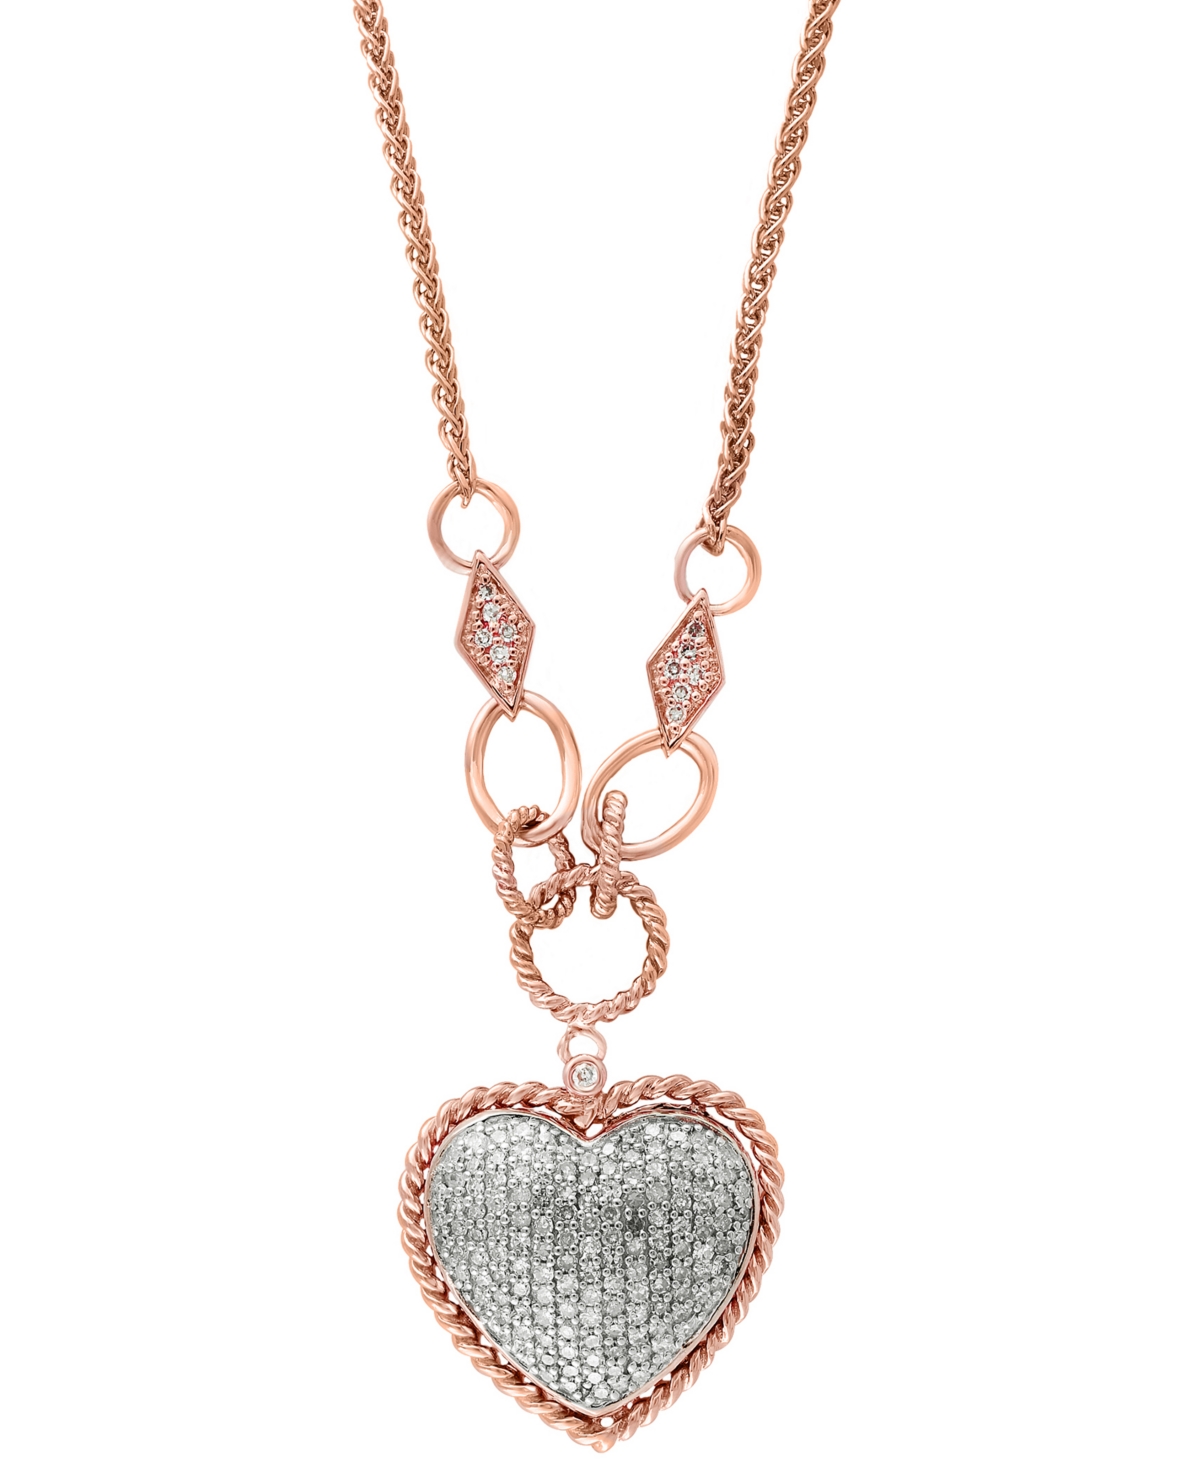 D'Oro by Effy Diamond Pave Diamond Heart Pendant (3/4 ct. t.w.) in 14k Gold or 14k Rose Gold - Yellow Gold